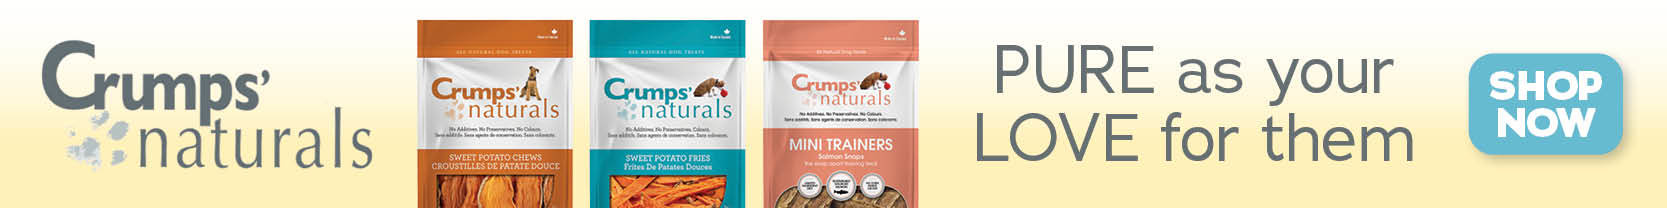 Crumps' naturals - pure as your love for them